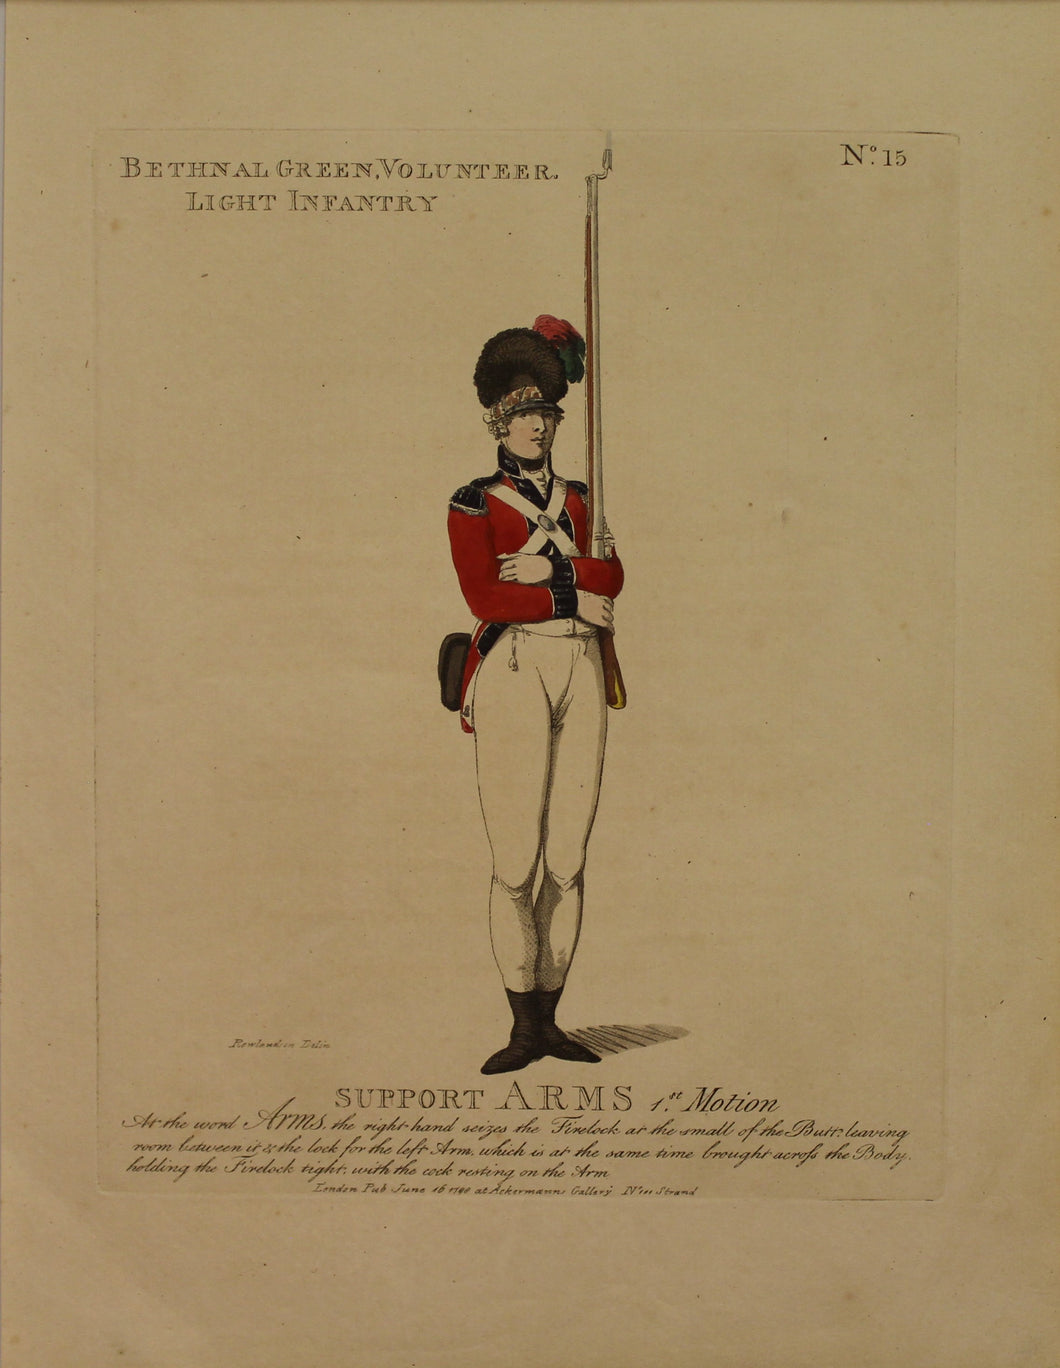 Military, Rowlandson Thomas, Bethnal Green Volunteer, Light Infantry, Support Arms, #15, Rowlandson Thomas, 1799